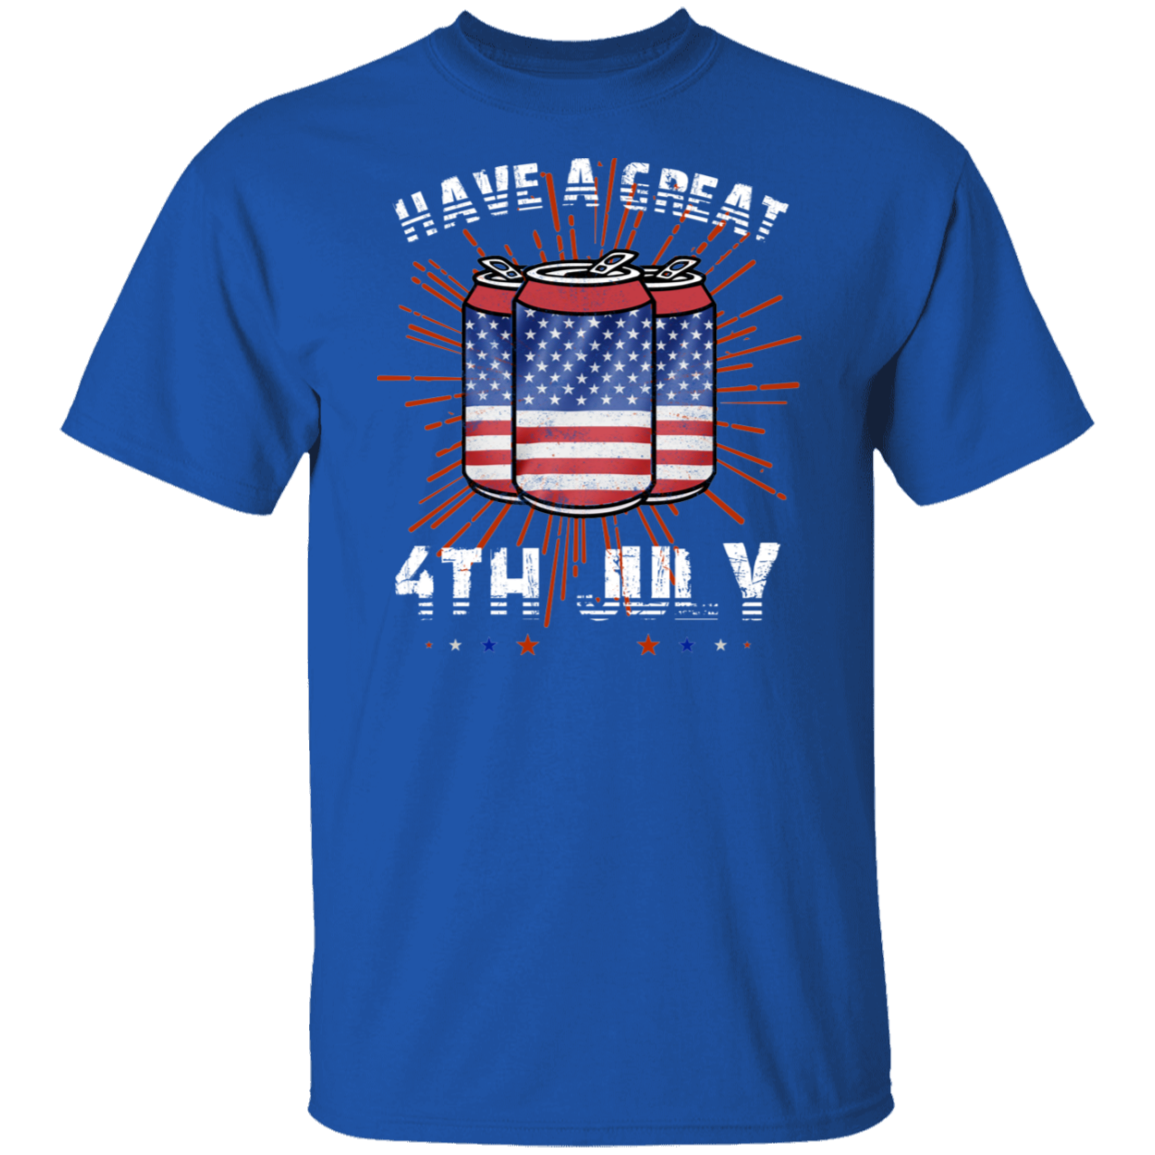 HAVE A GREAT 4TH OF JULY CAN 5.3 oz. T-Shirt